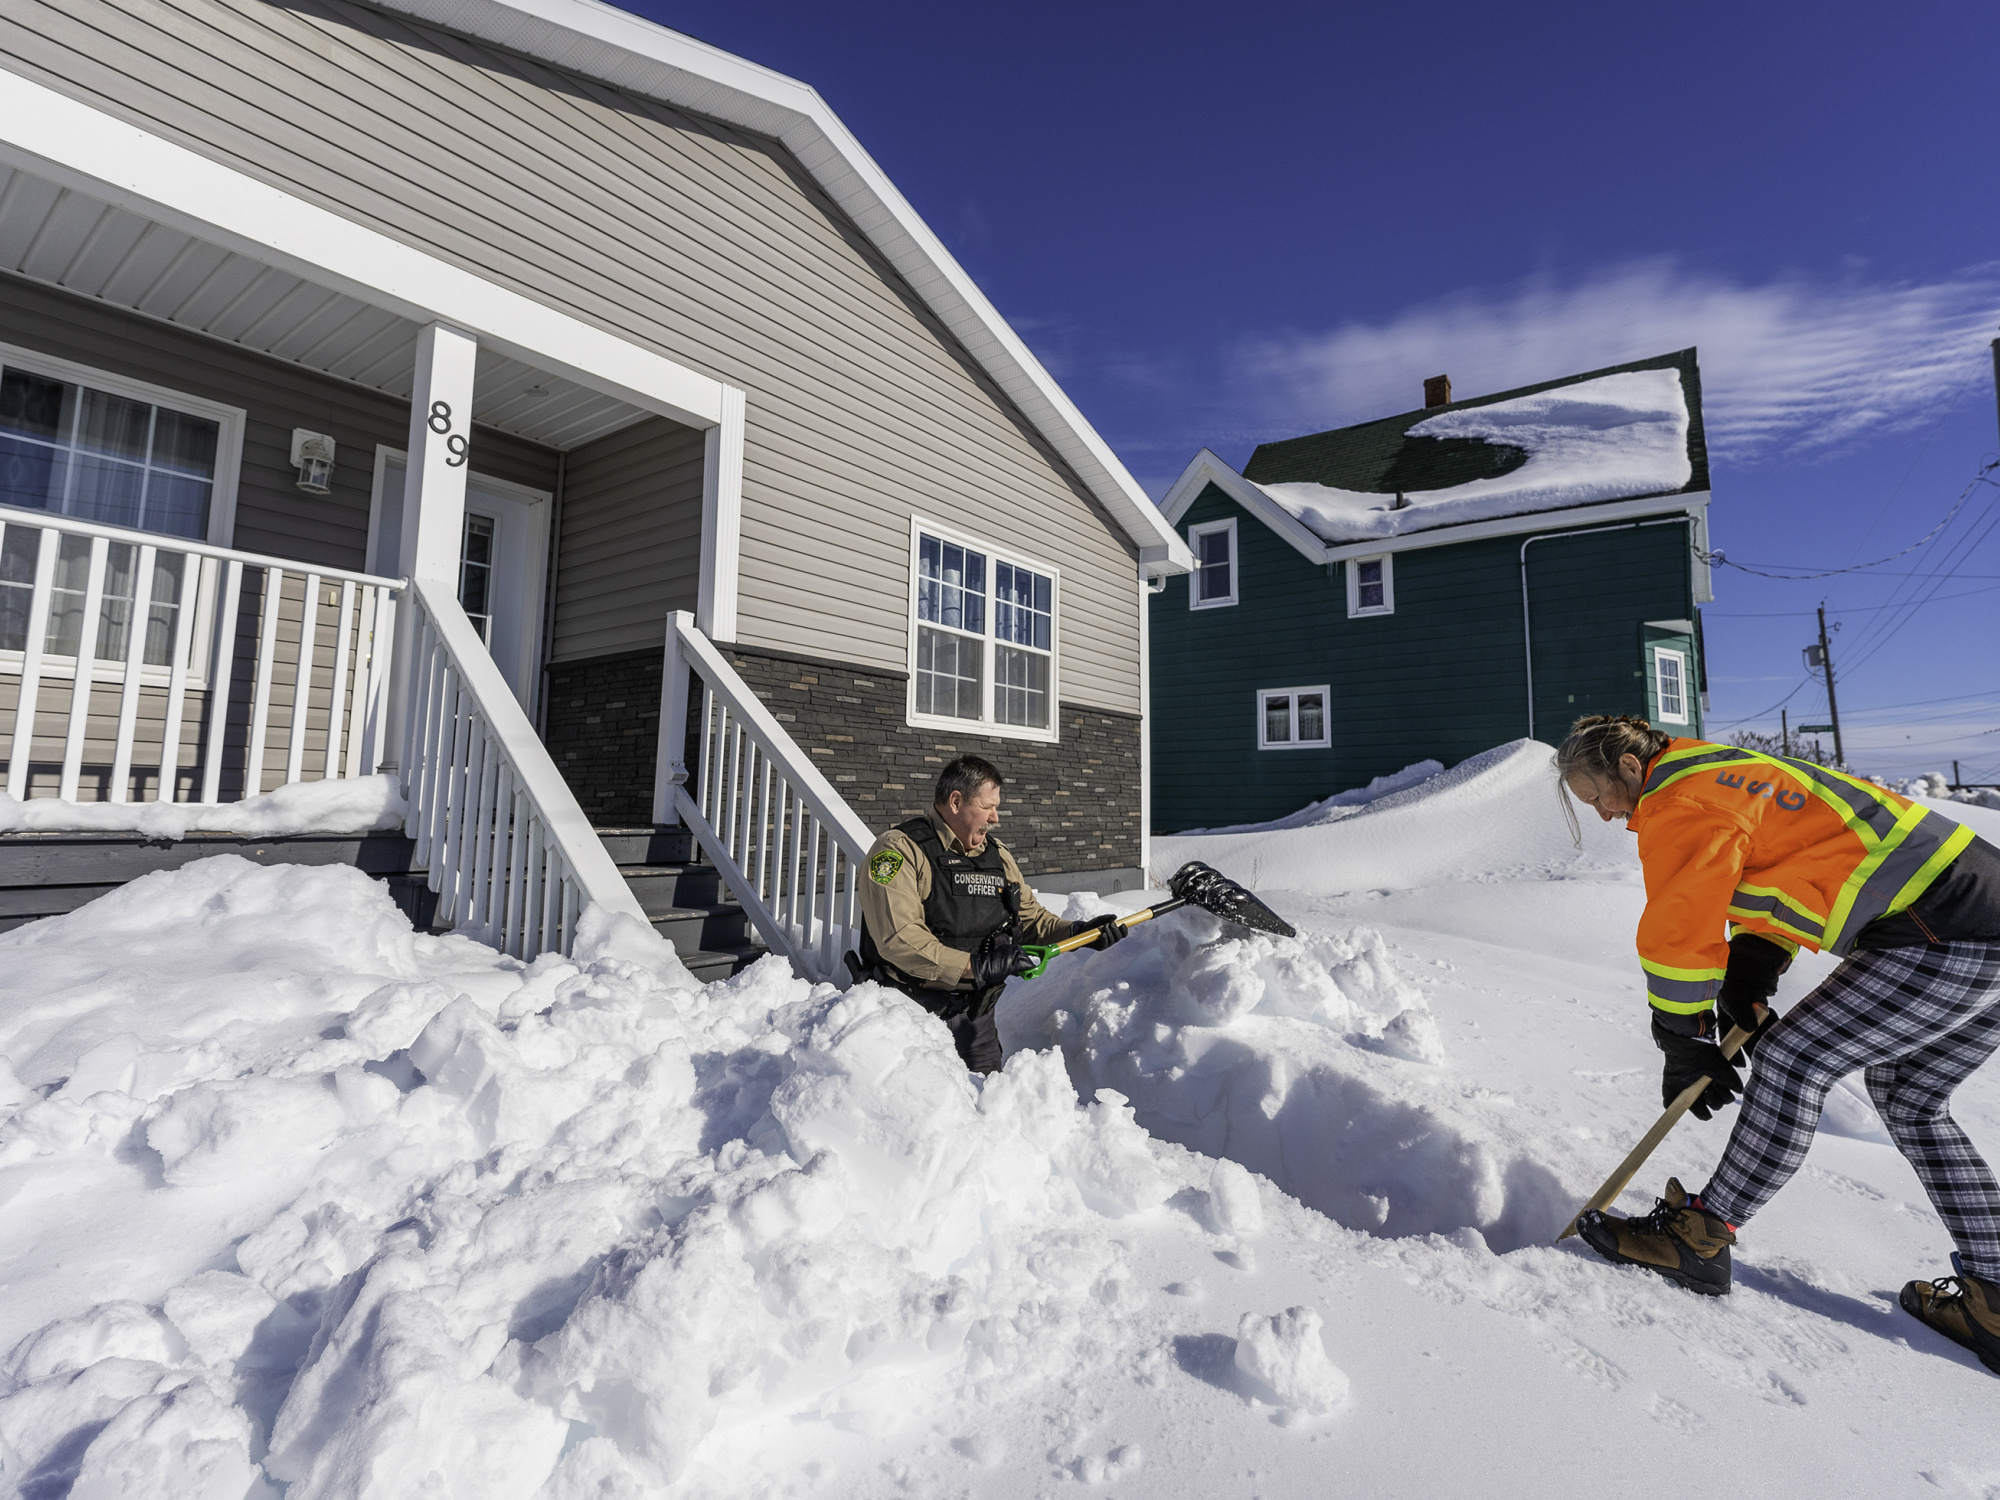 Department of Natural Resources and Renewables staff shovel out the entryway to a home.